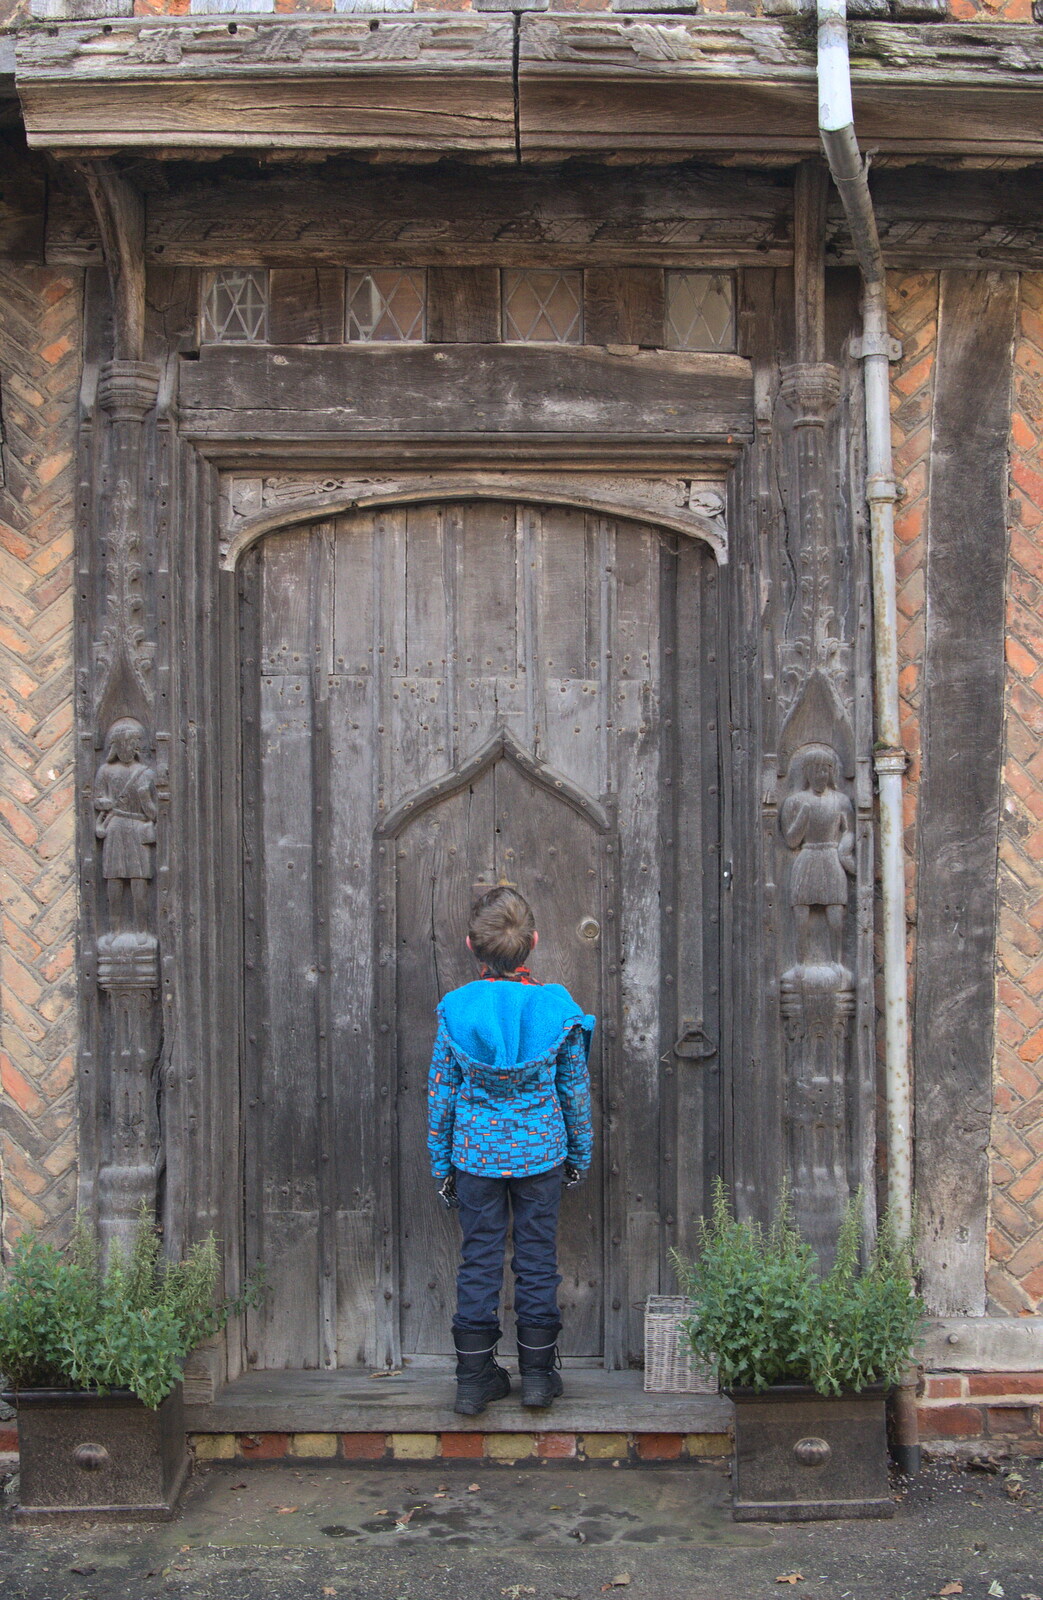 Fred inspects a door within a door from A Day in Lavenham, Suffolk - 22nd January 2017